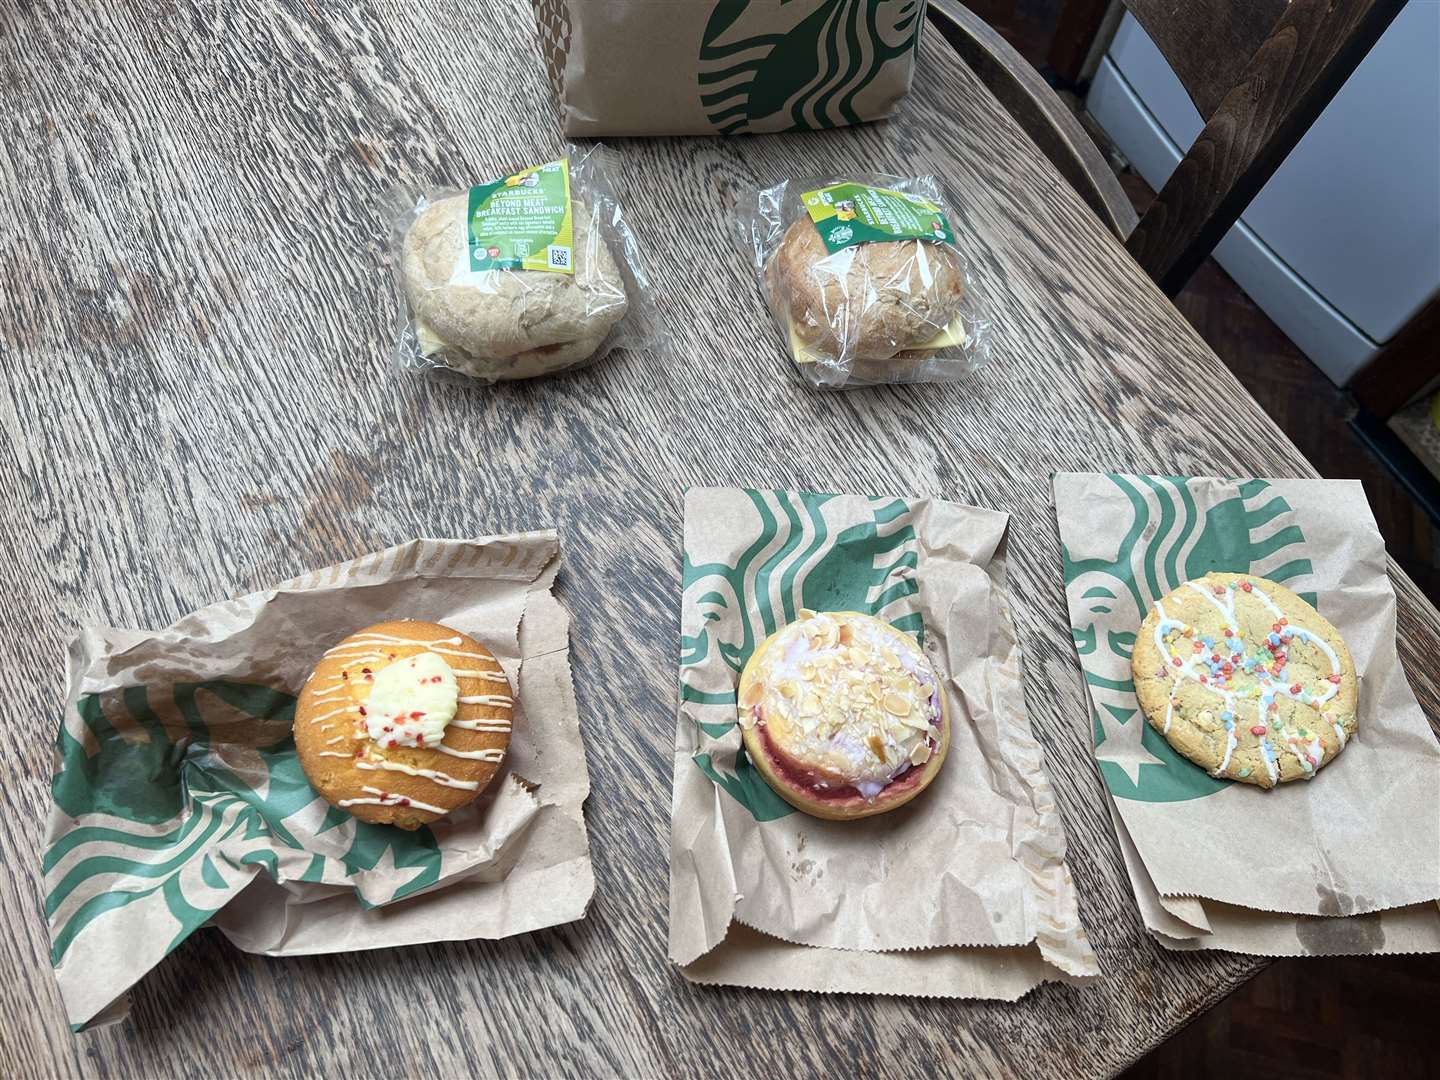 What was inside the Sheppey Starbucks Too Good To Go bag